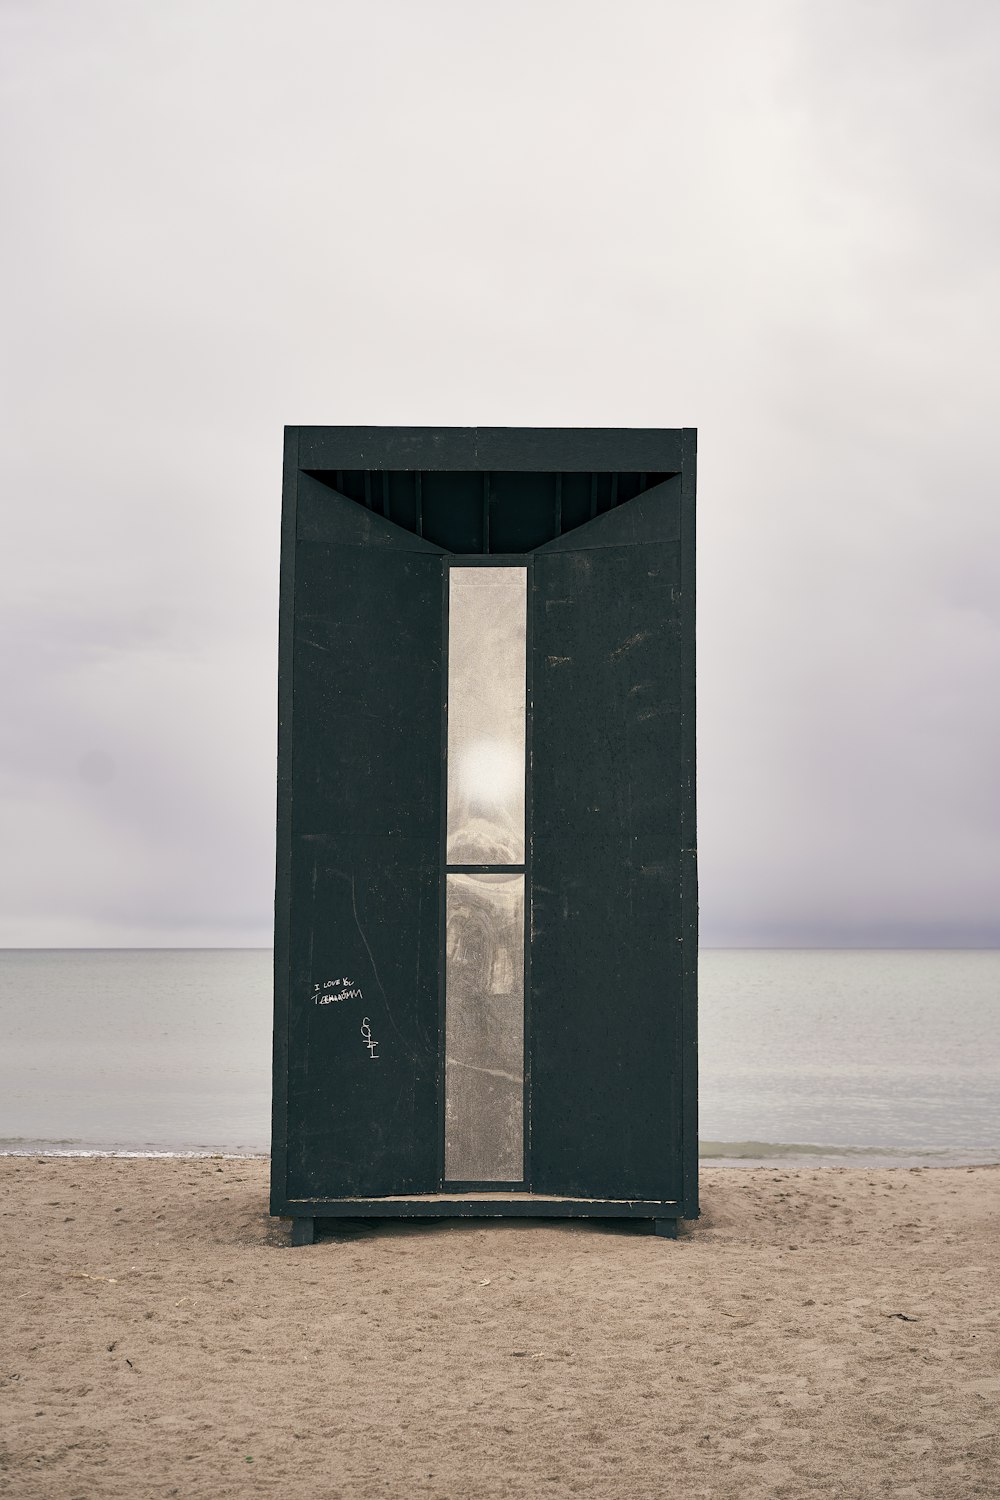 a black outhouse sitting on top of a sandy beach